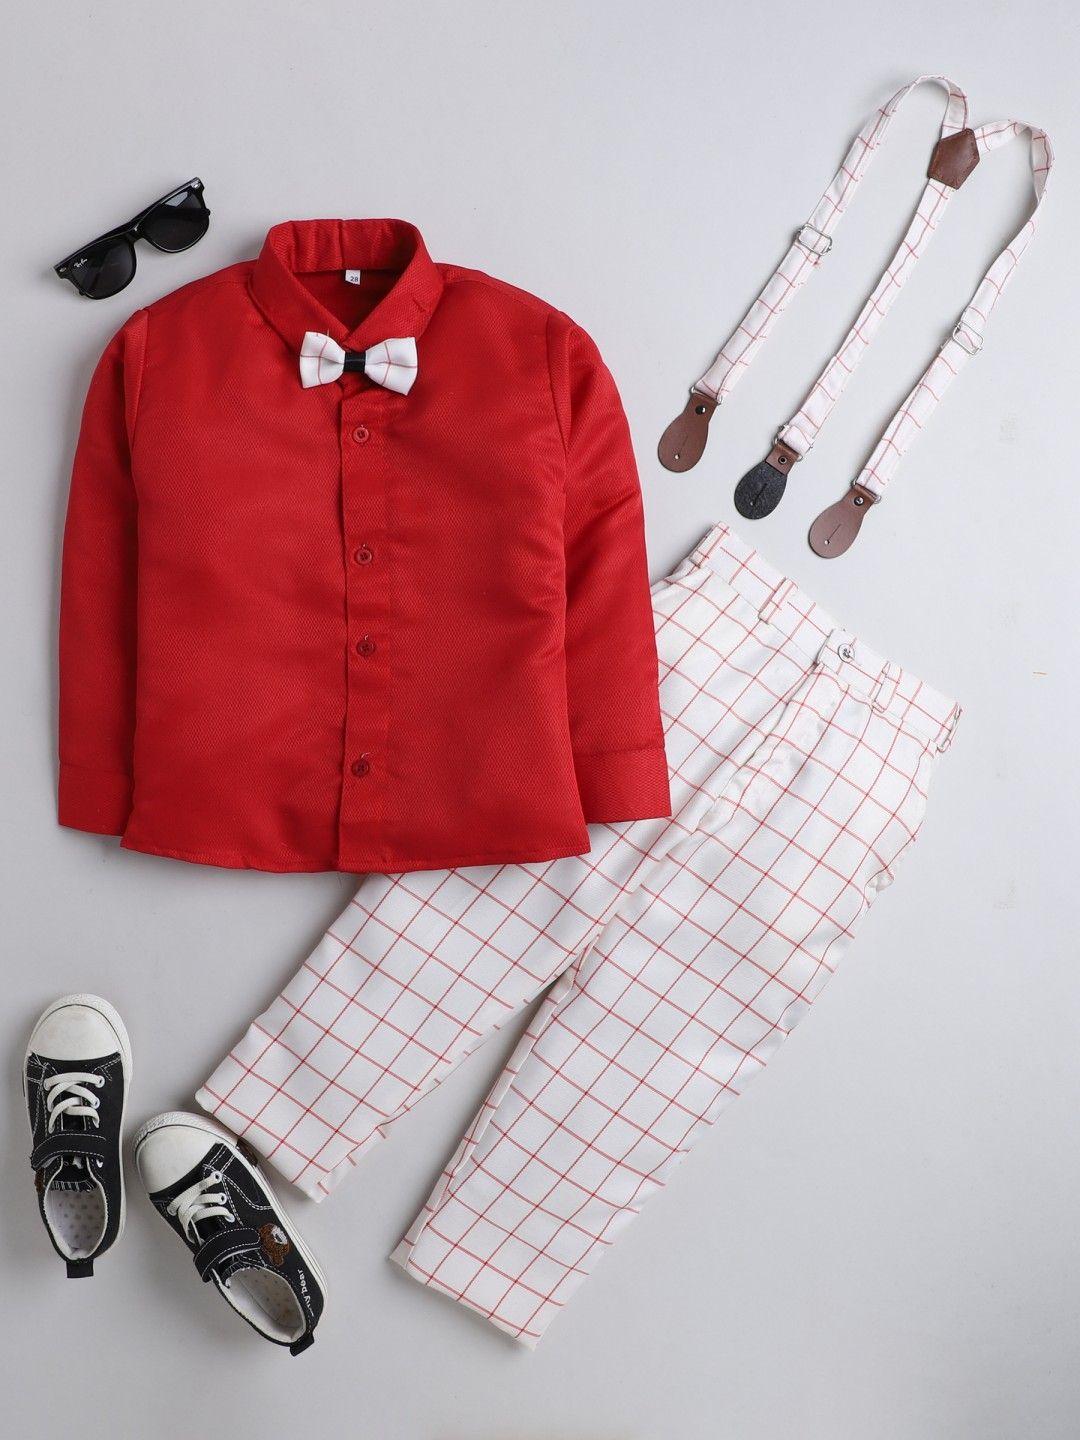 dkgf fashion boys red & white shirt with trousers with suspenders